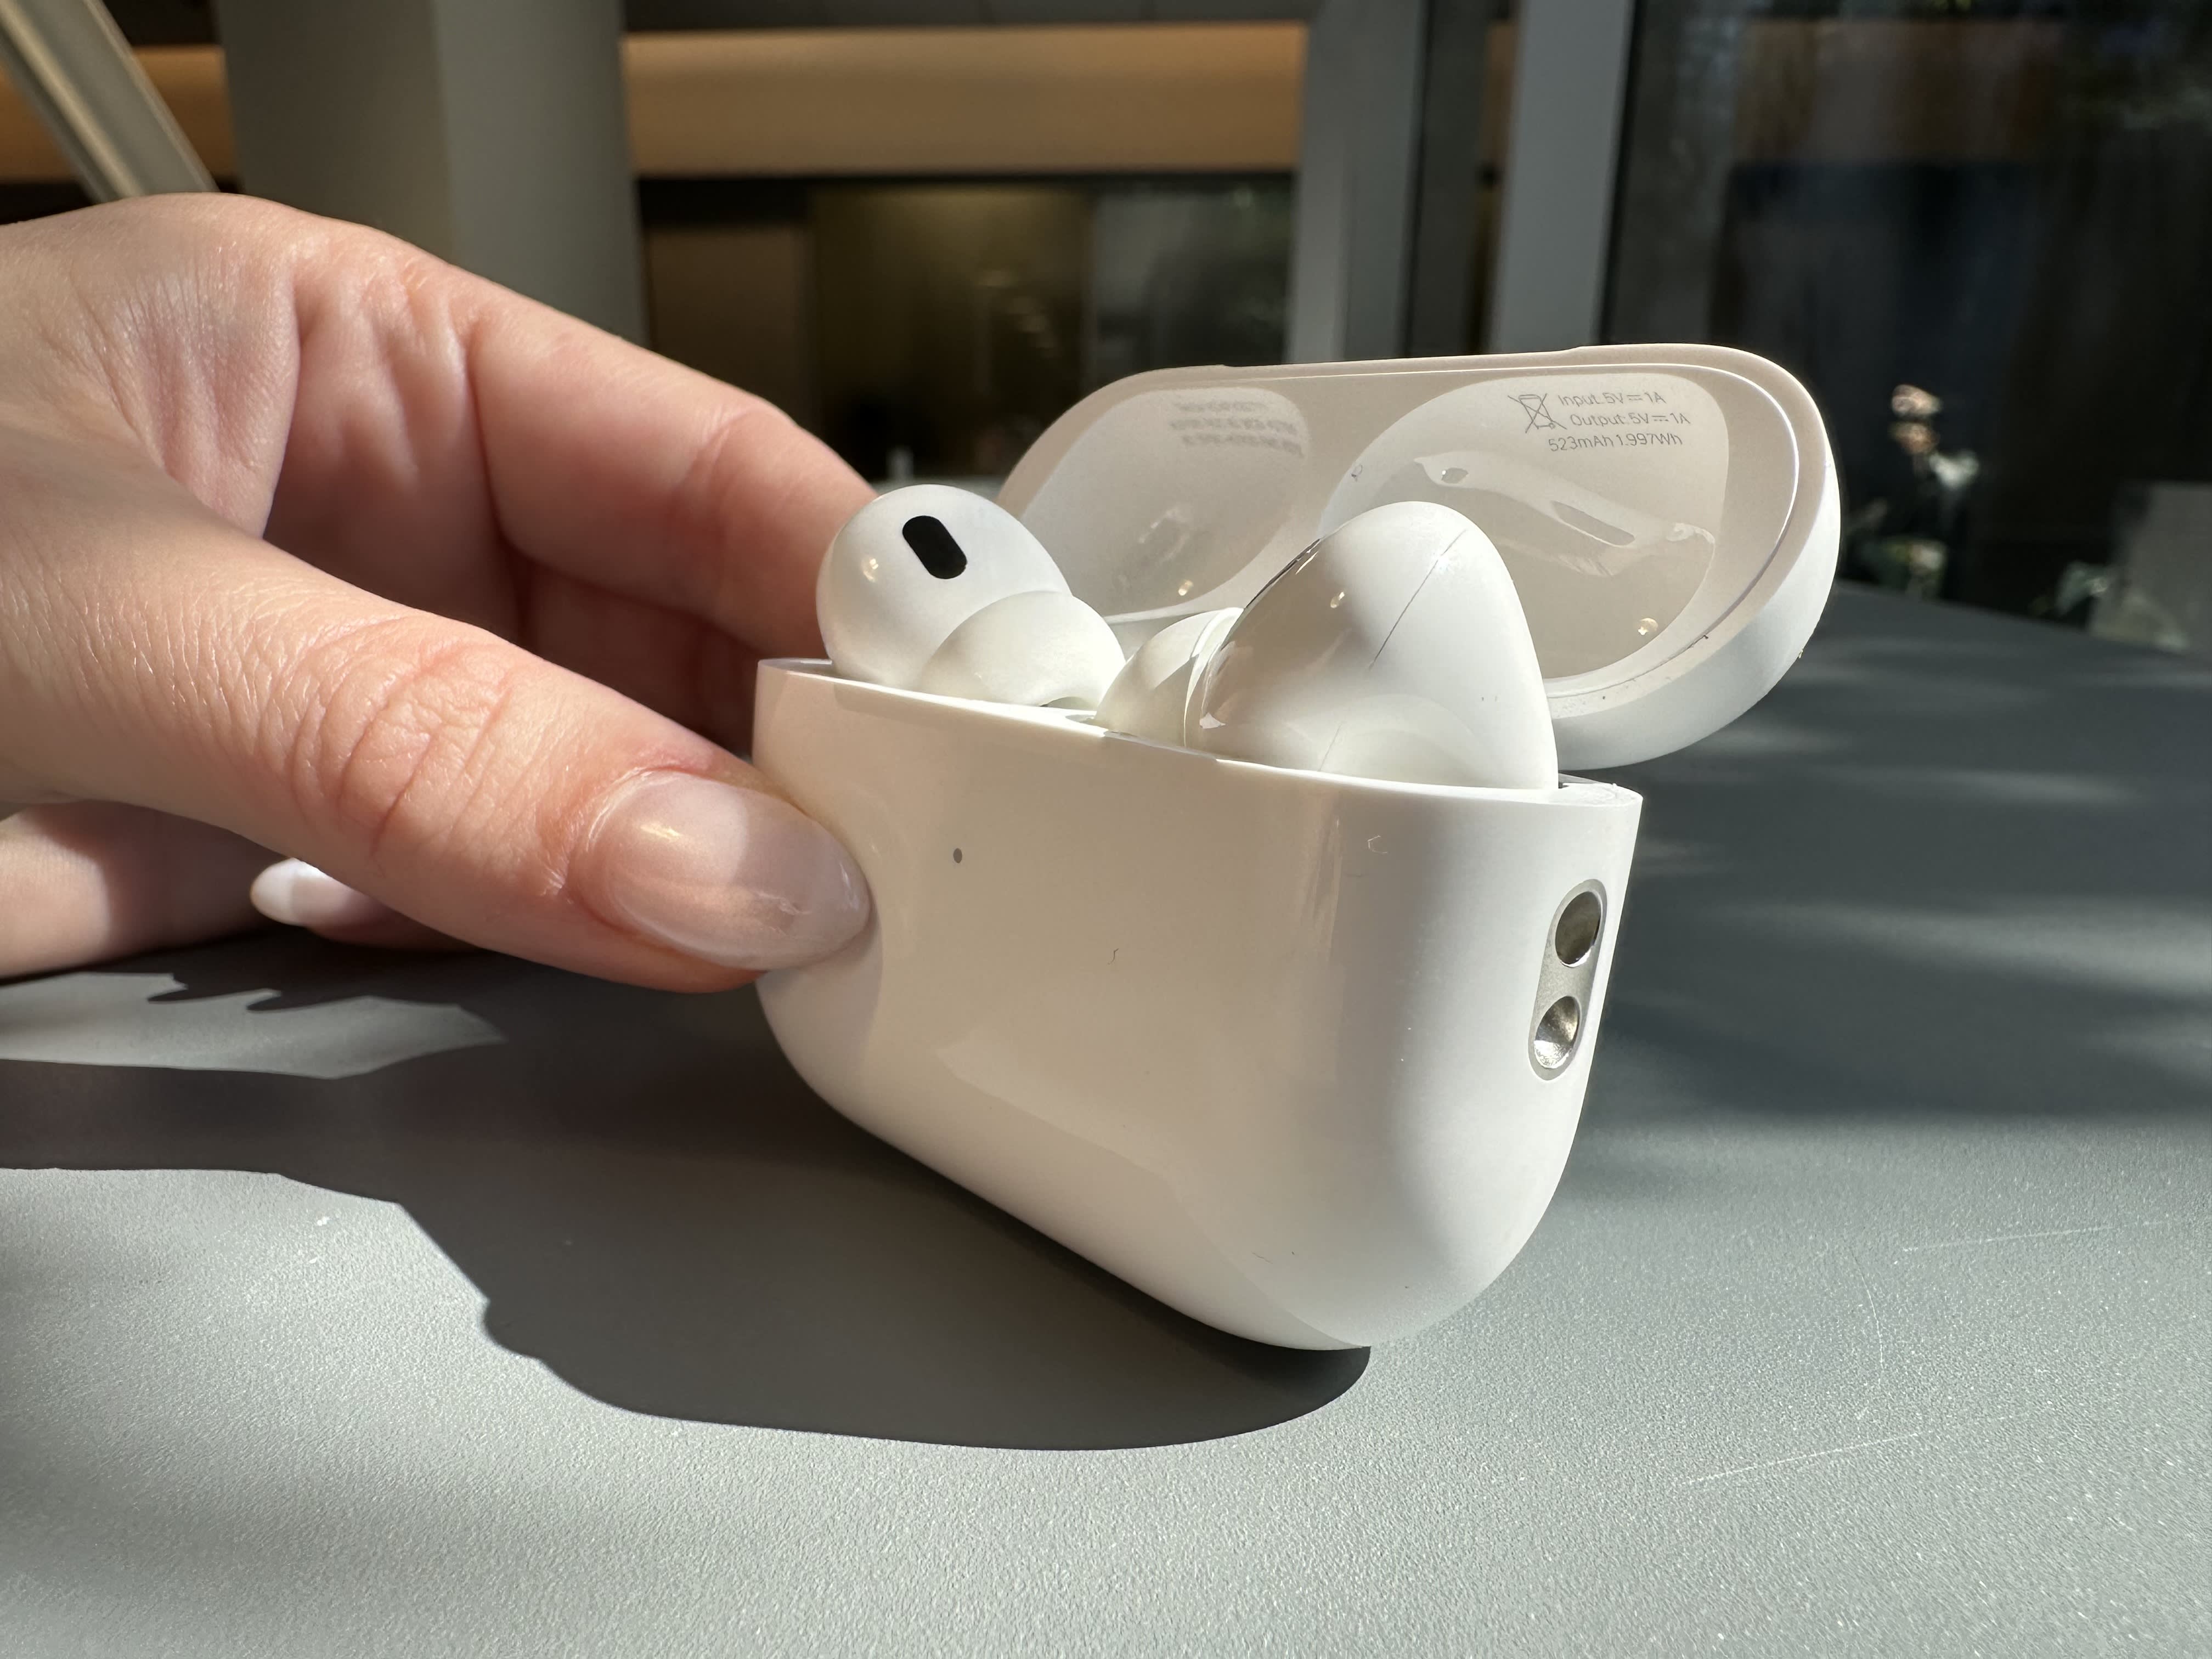 You Got the AirPods Pro for the Holidays. Here Are Some of the Coolest Features You Need to Know About